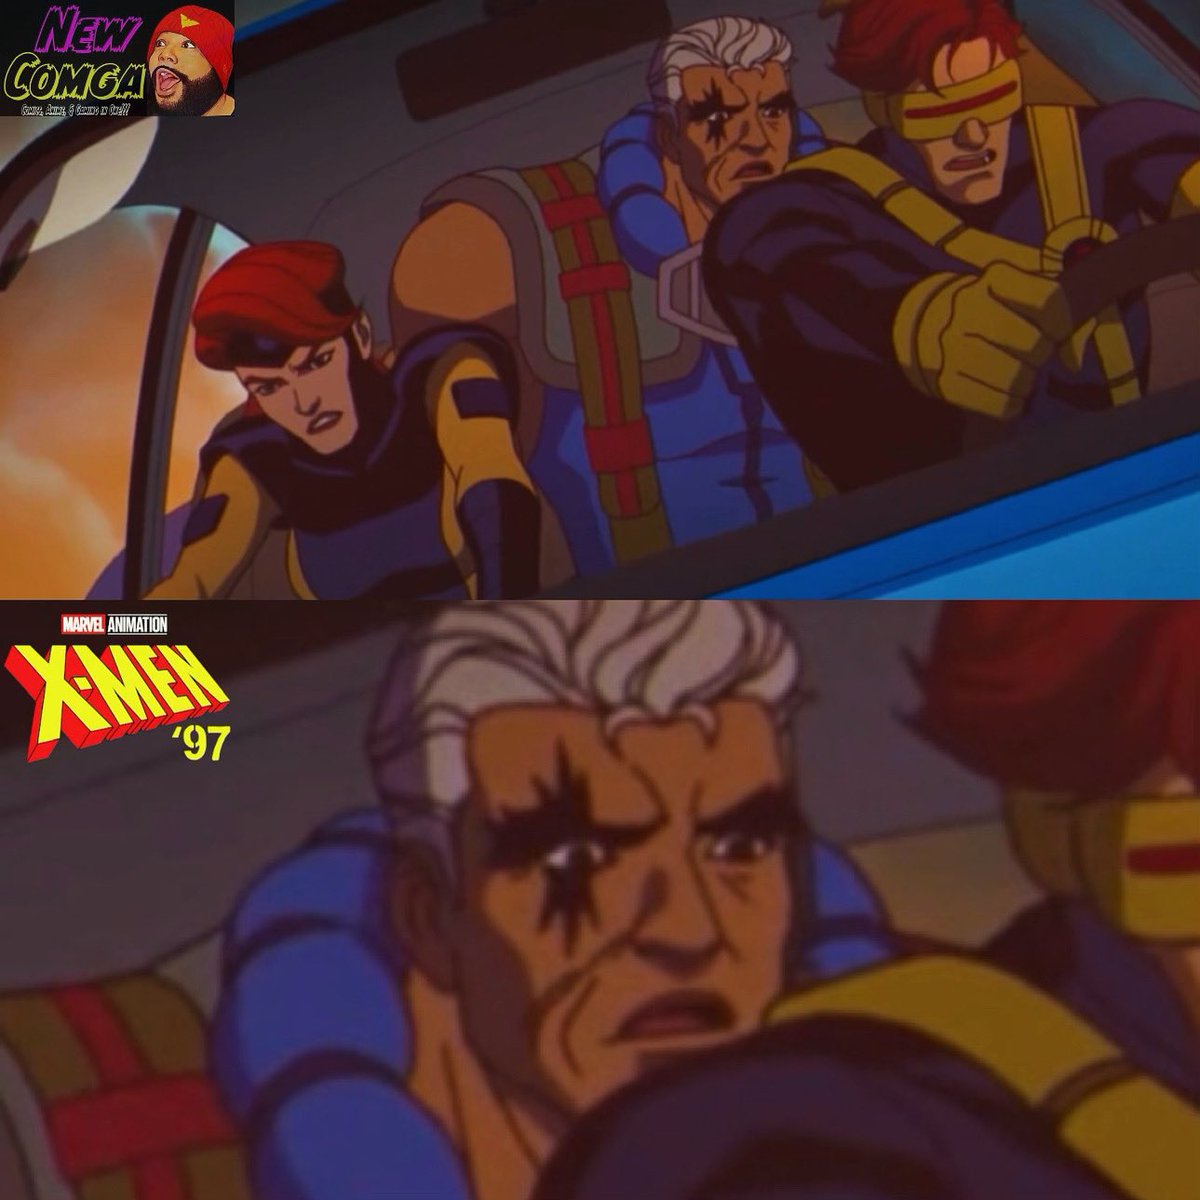 Cables face when they came out the Blackbird in the Porsche had me in tears 😭 
This the first time a child drives with their parent and their parent acting a ass behind the wheel

#Xmen #Xmen97 #Cable #Cyclops #JeanGrey